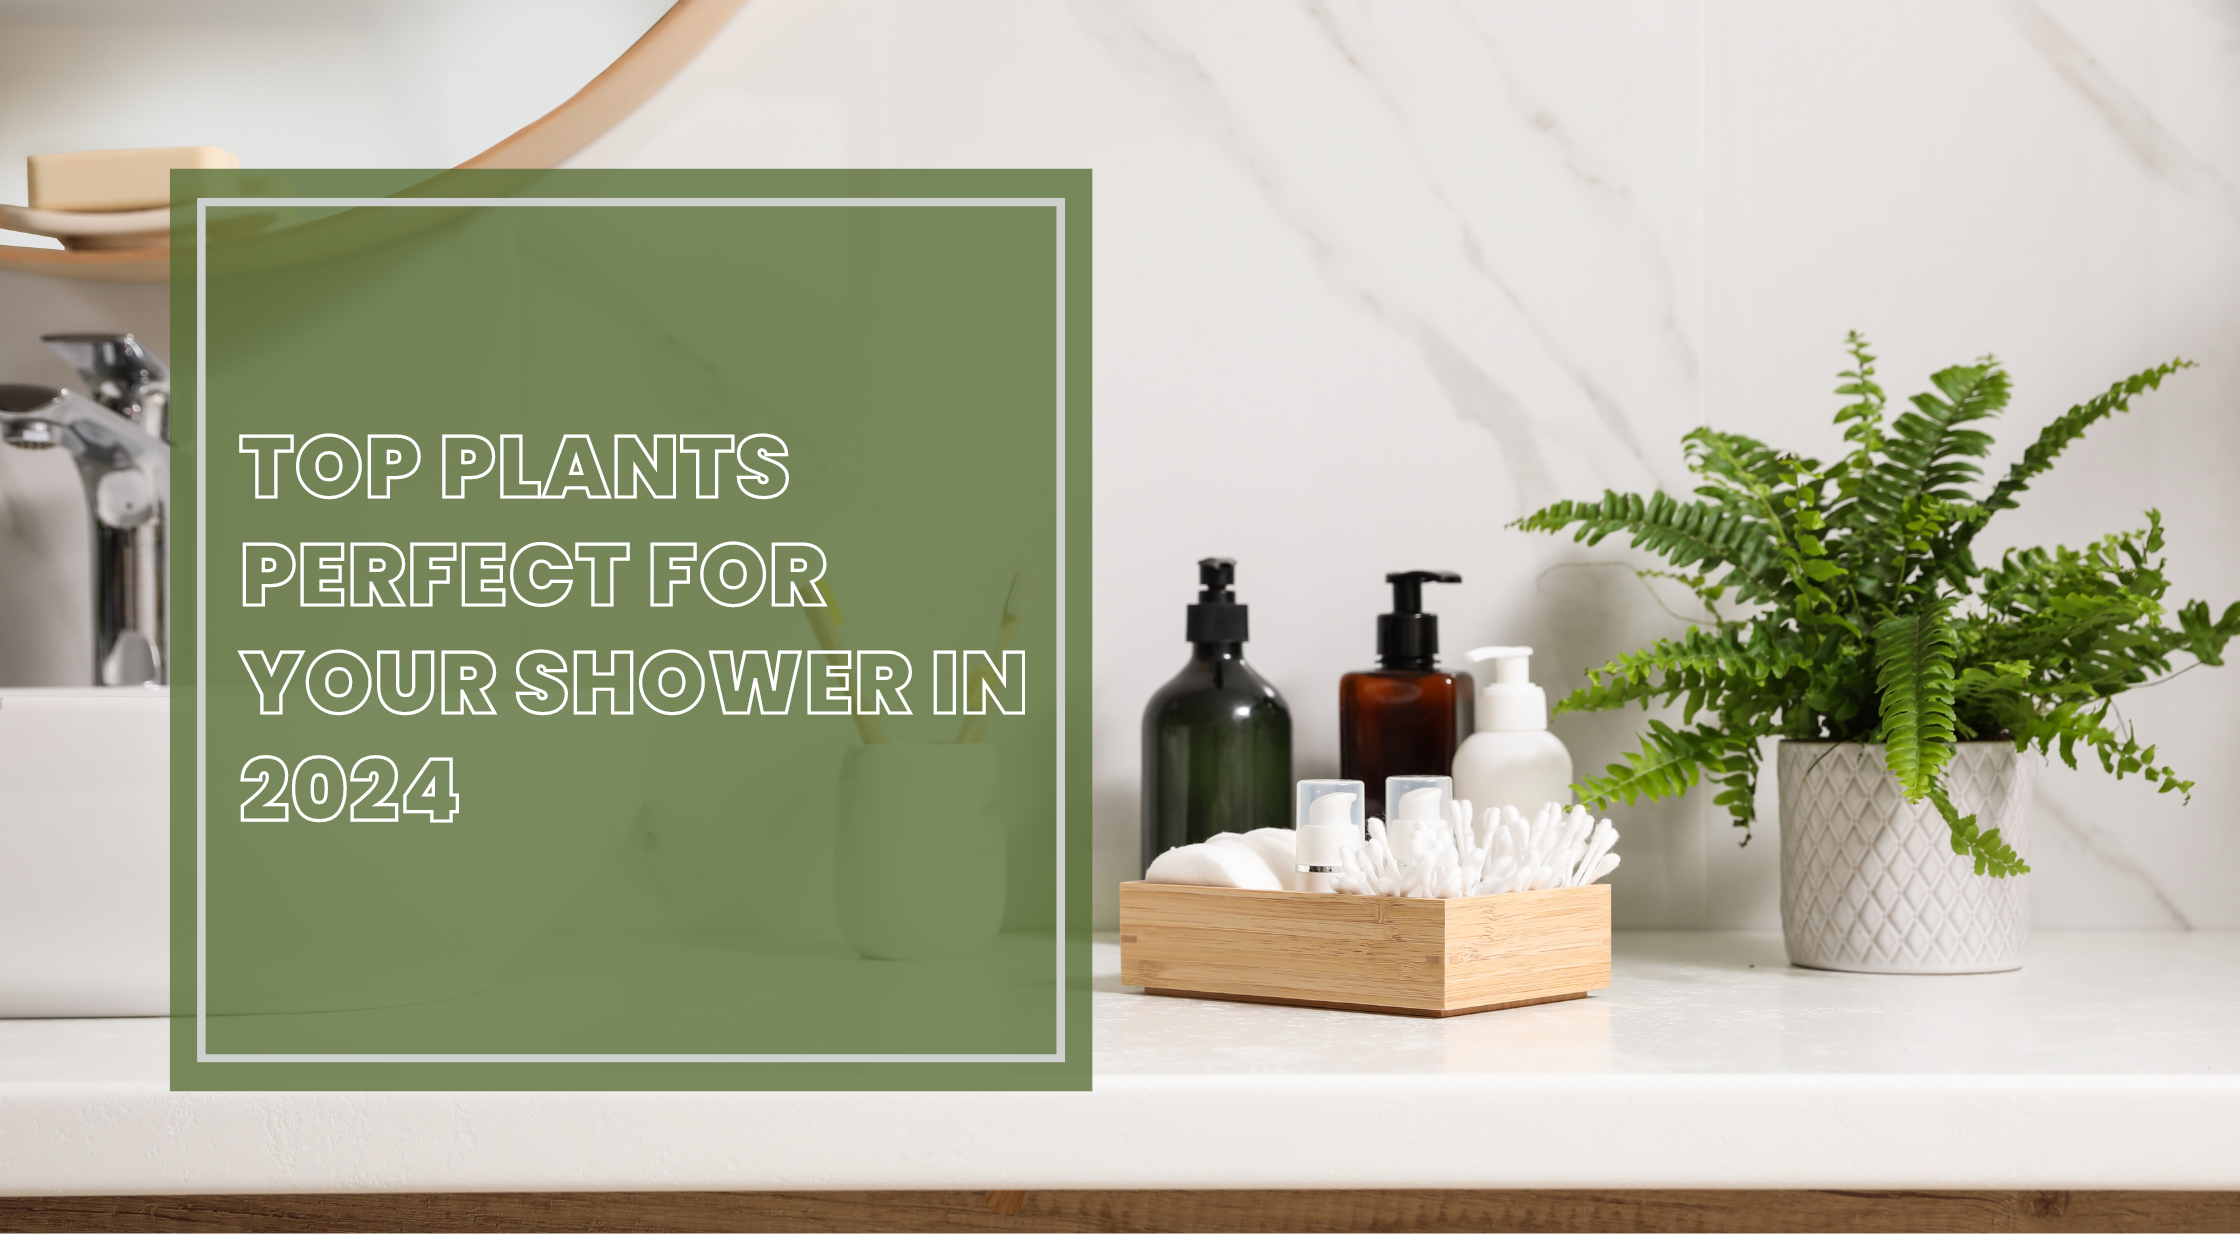 Top Plants Perfect for Your Shower in 2024